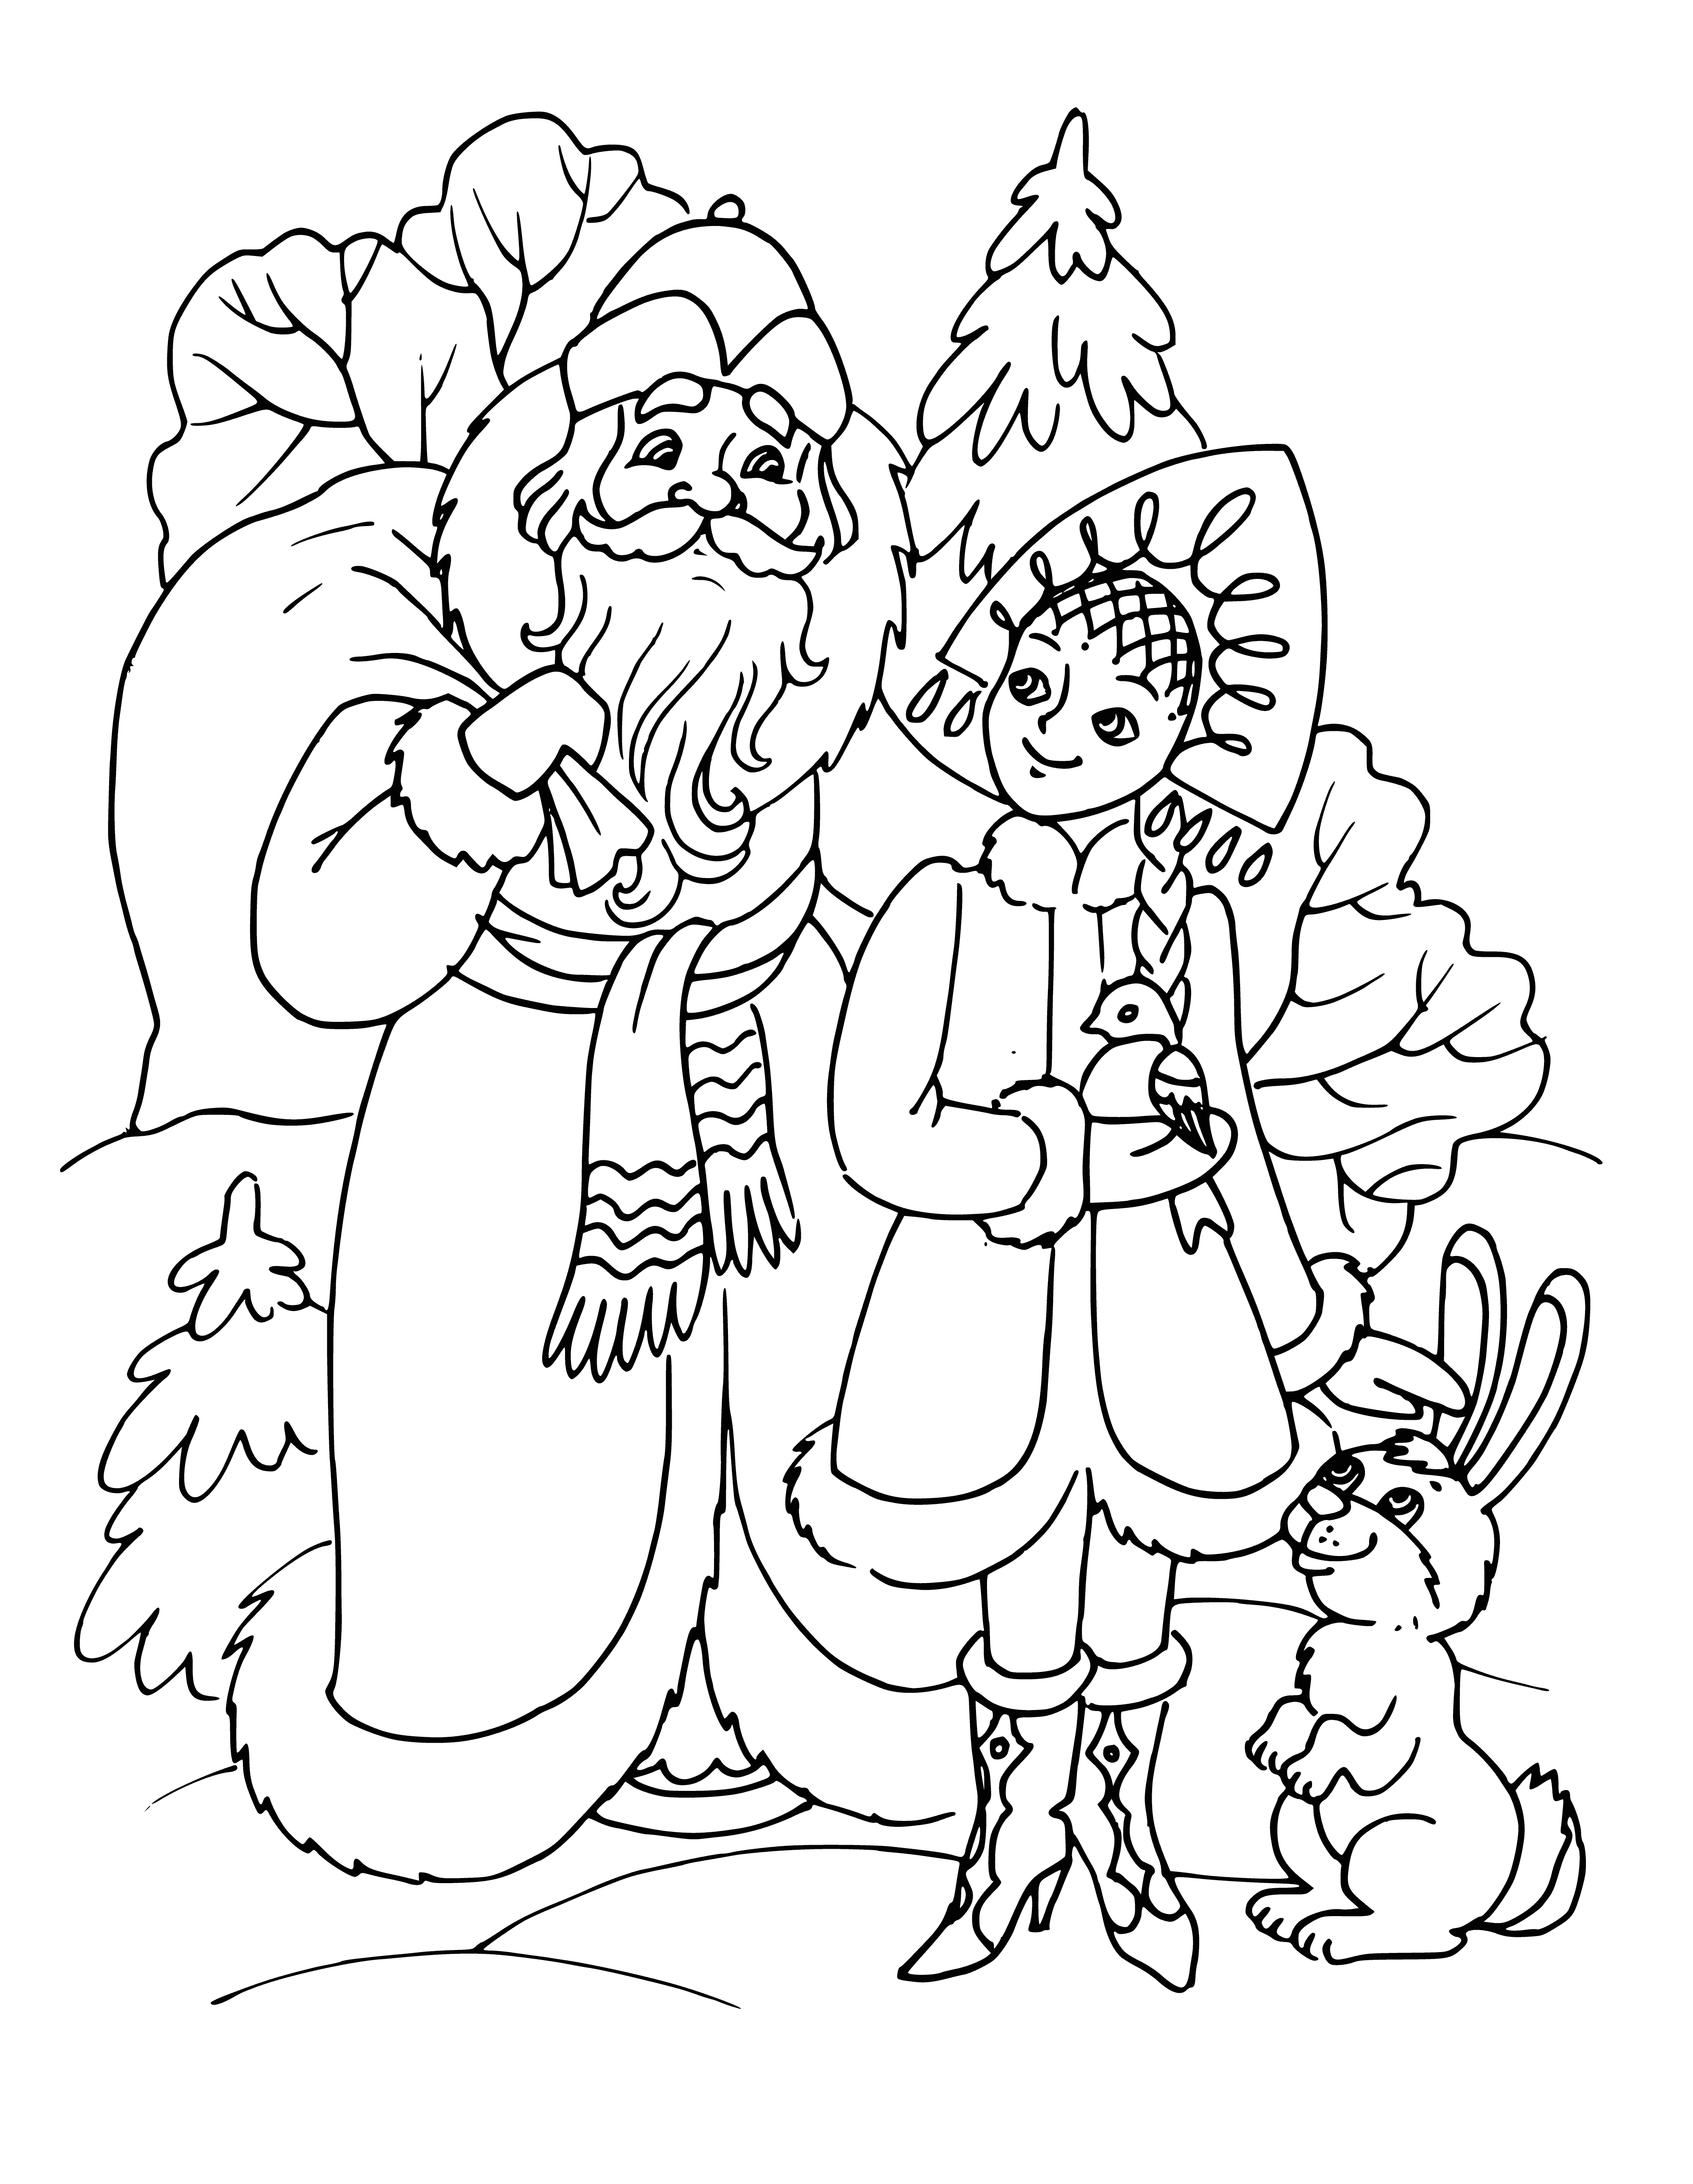 coloring page: Tall, thin man & beautiful girl stand in snow; man wears red coat+hat, holds staff; girl wears white dress+scarf, has blonde hair.